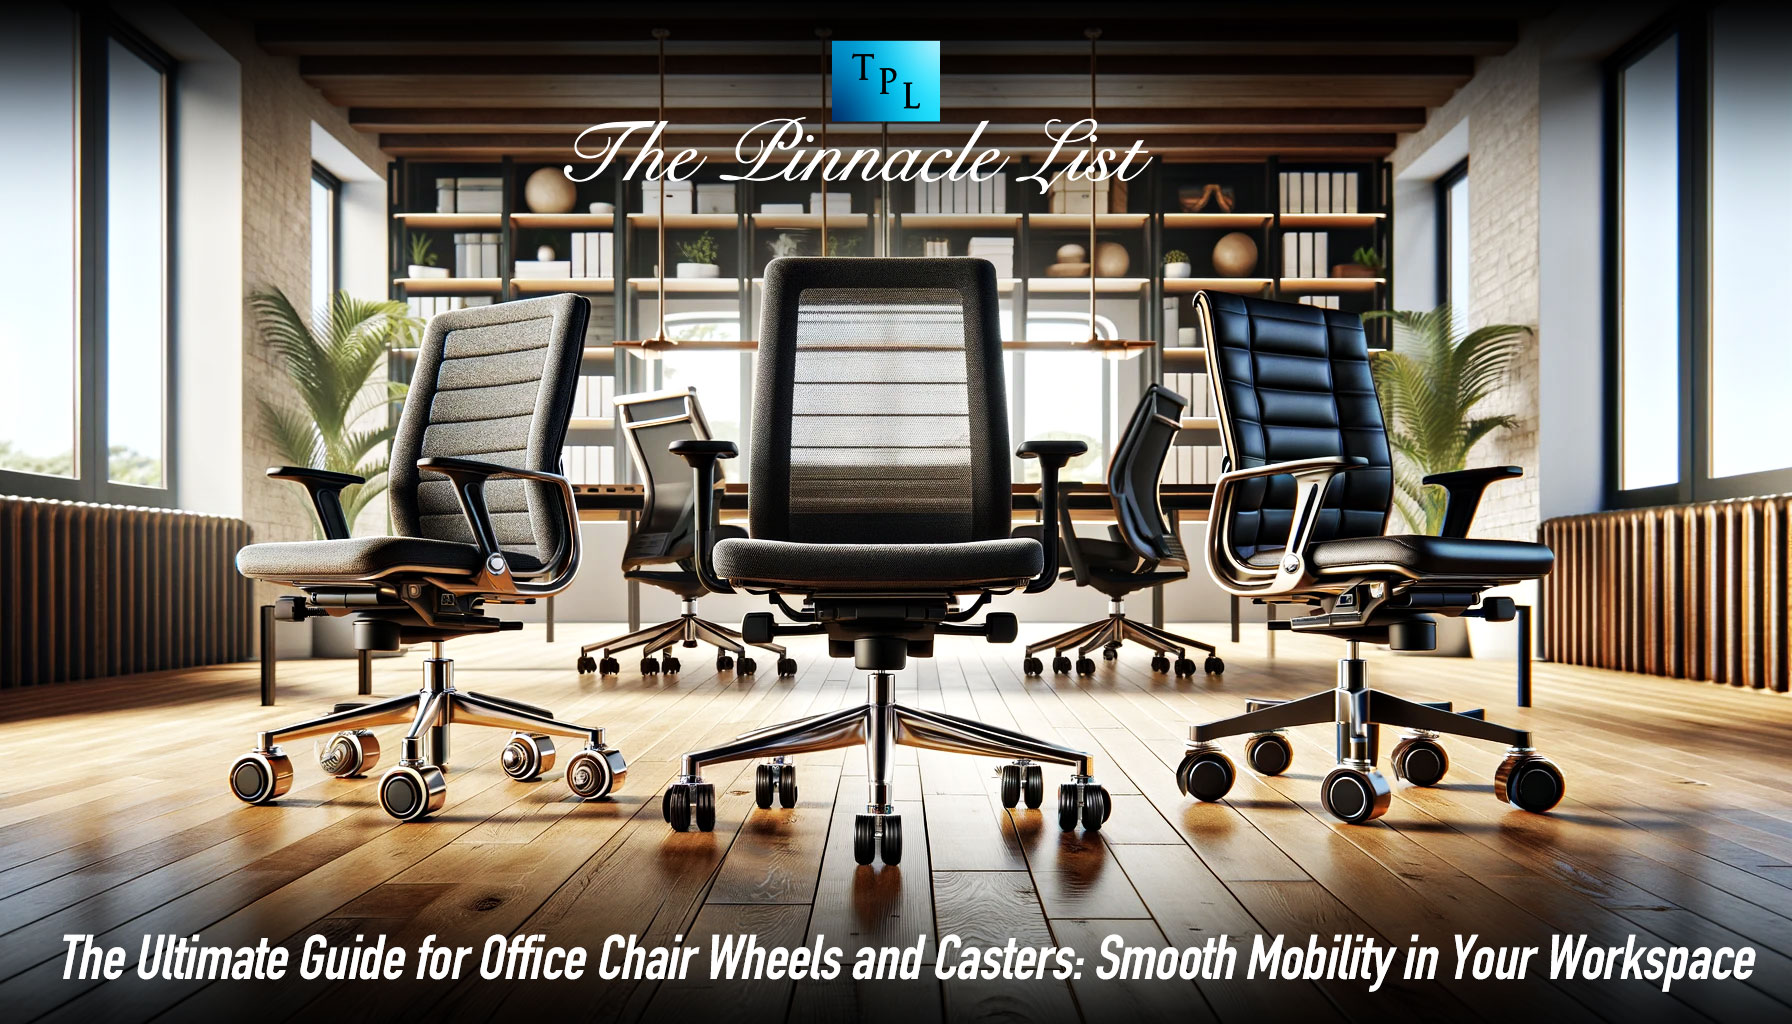 The Ultimate Guide for Office Chair Wheels and Casters: Smooth Mobility in Your Workspace